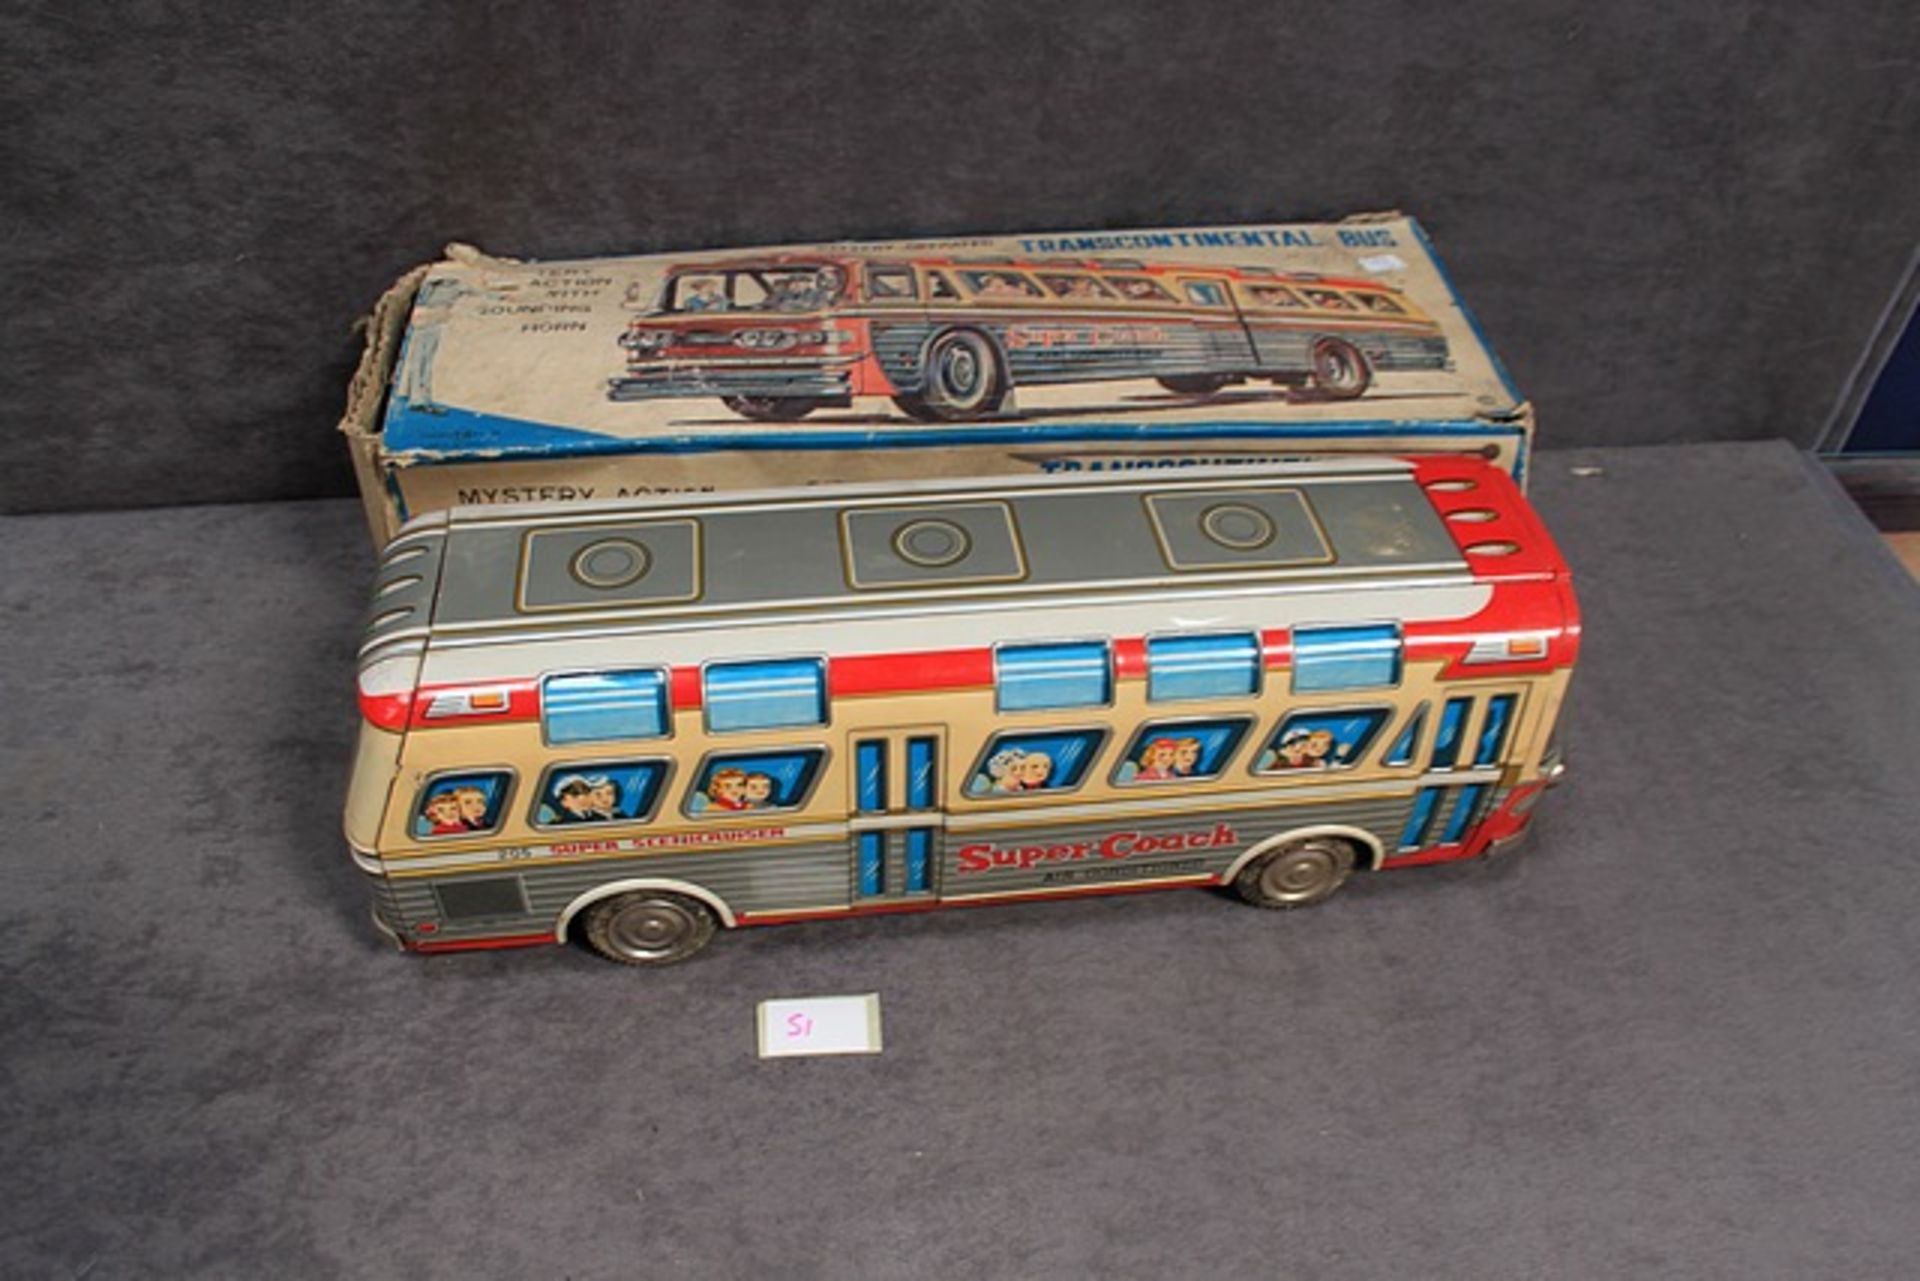 Battery Operated Tanscontinental Bus (Trade Mark TN) in box